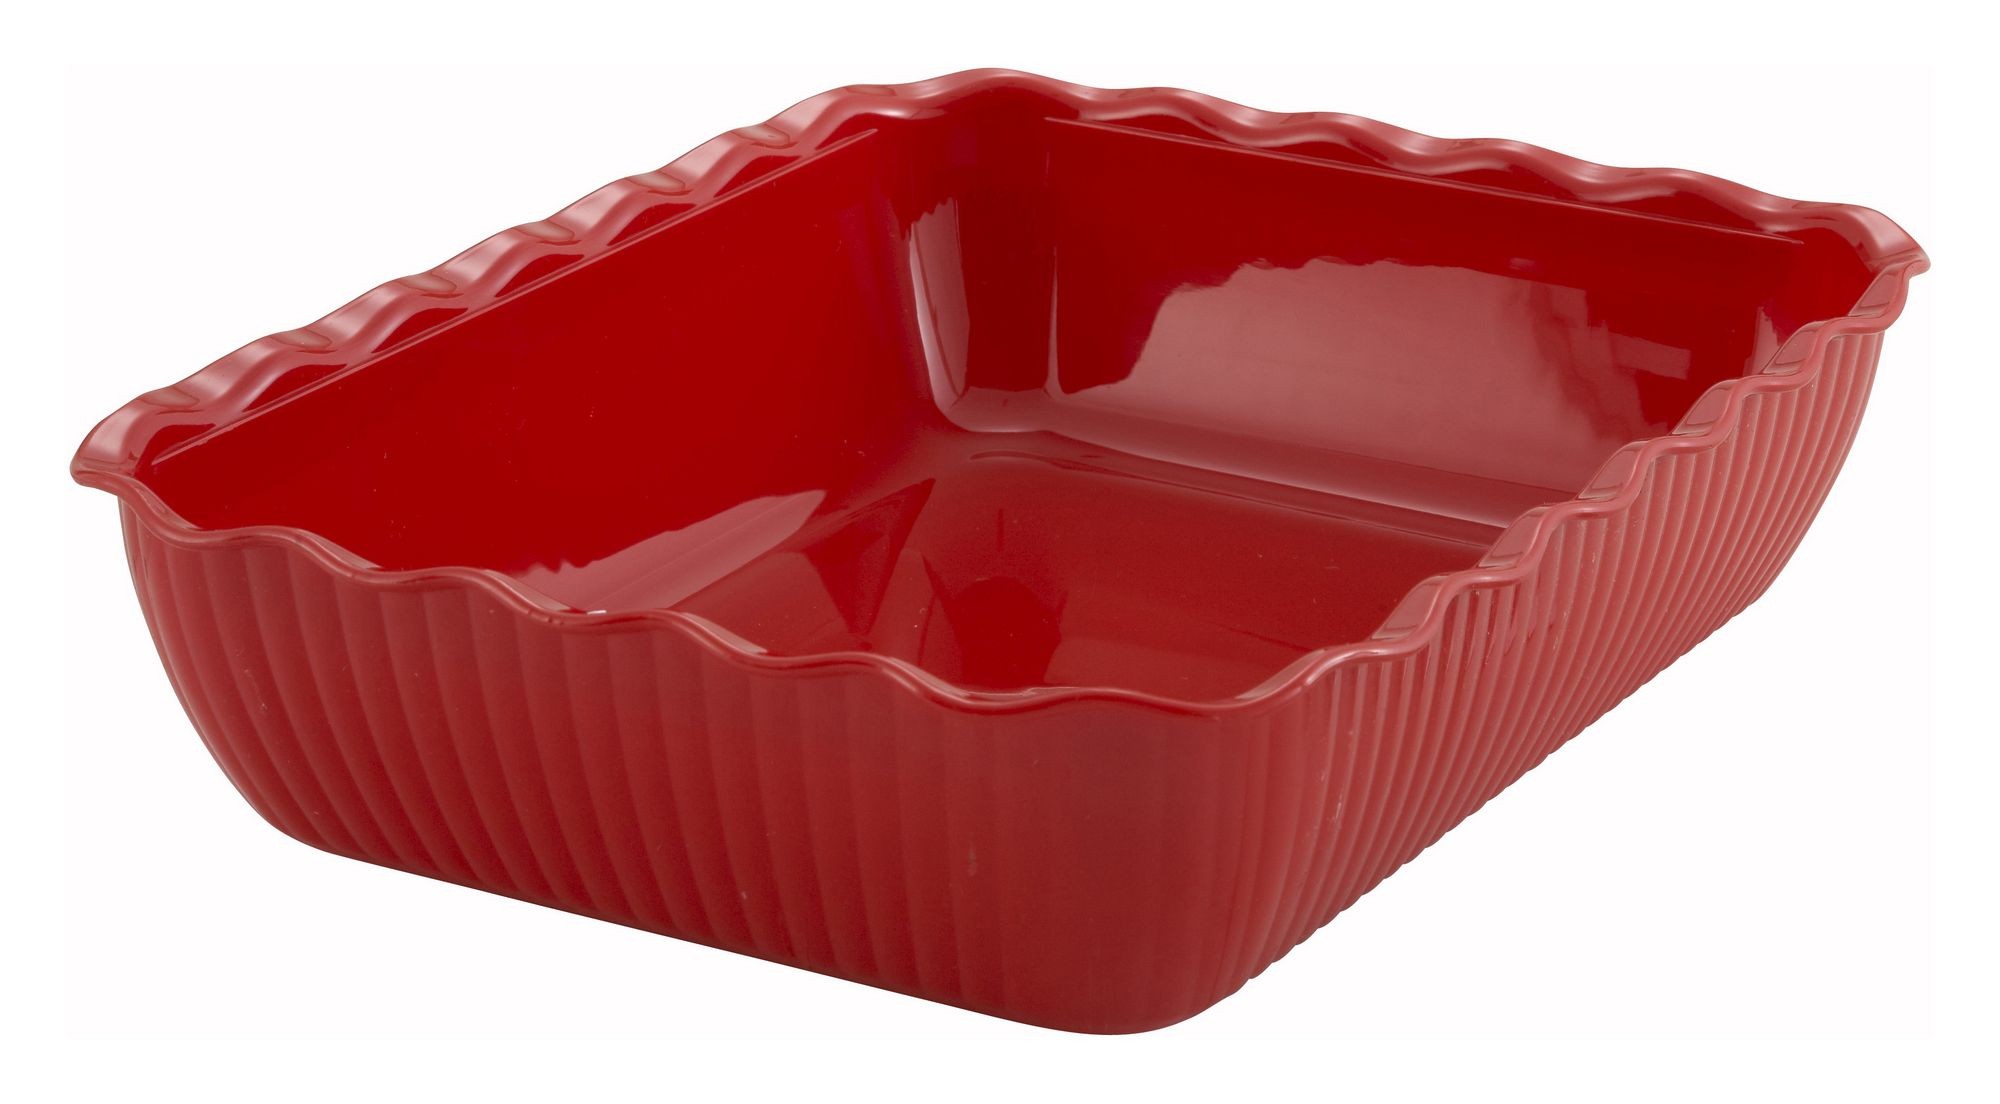 Winco CRK-13R Red Food Storage Container/Crock 13 x 10" x 3"